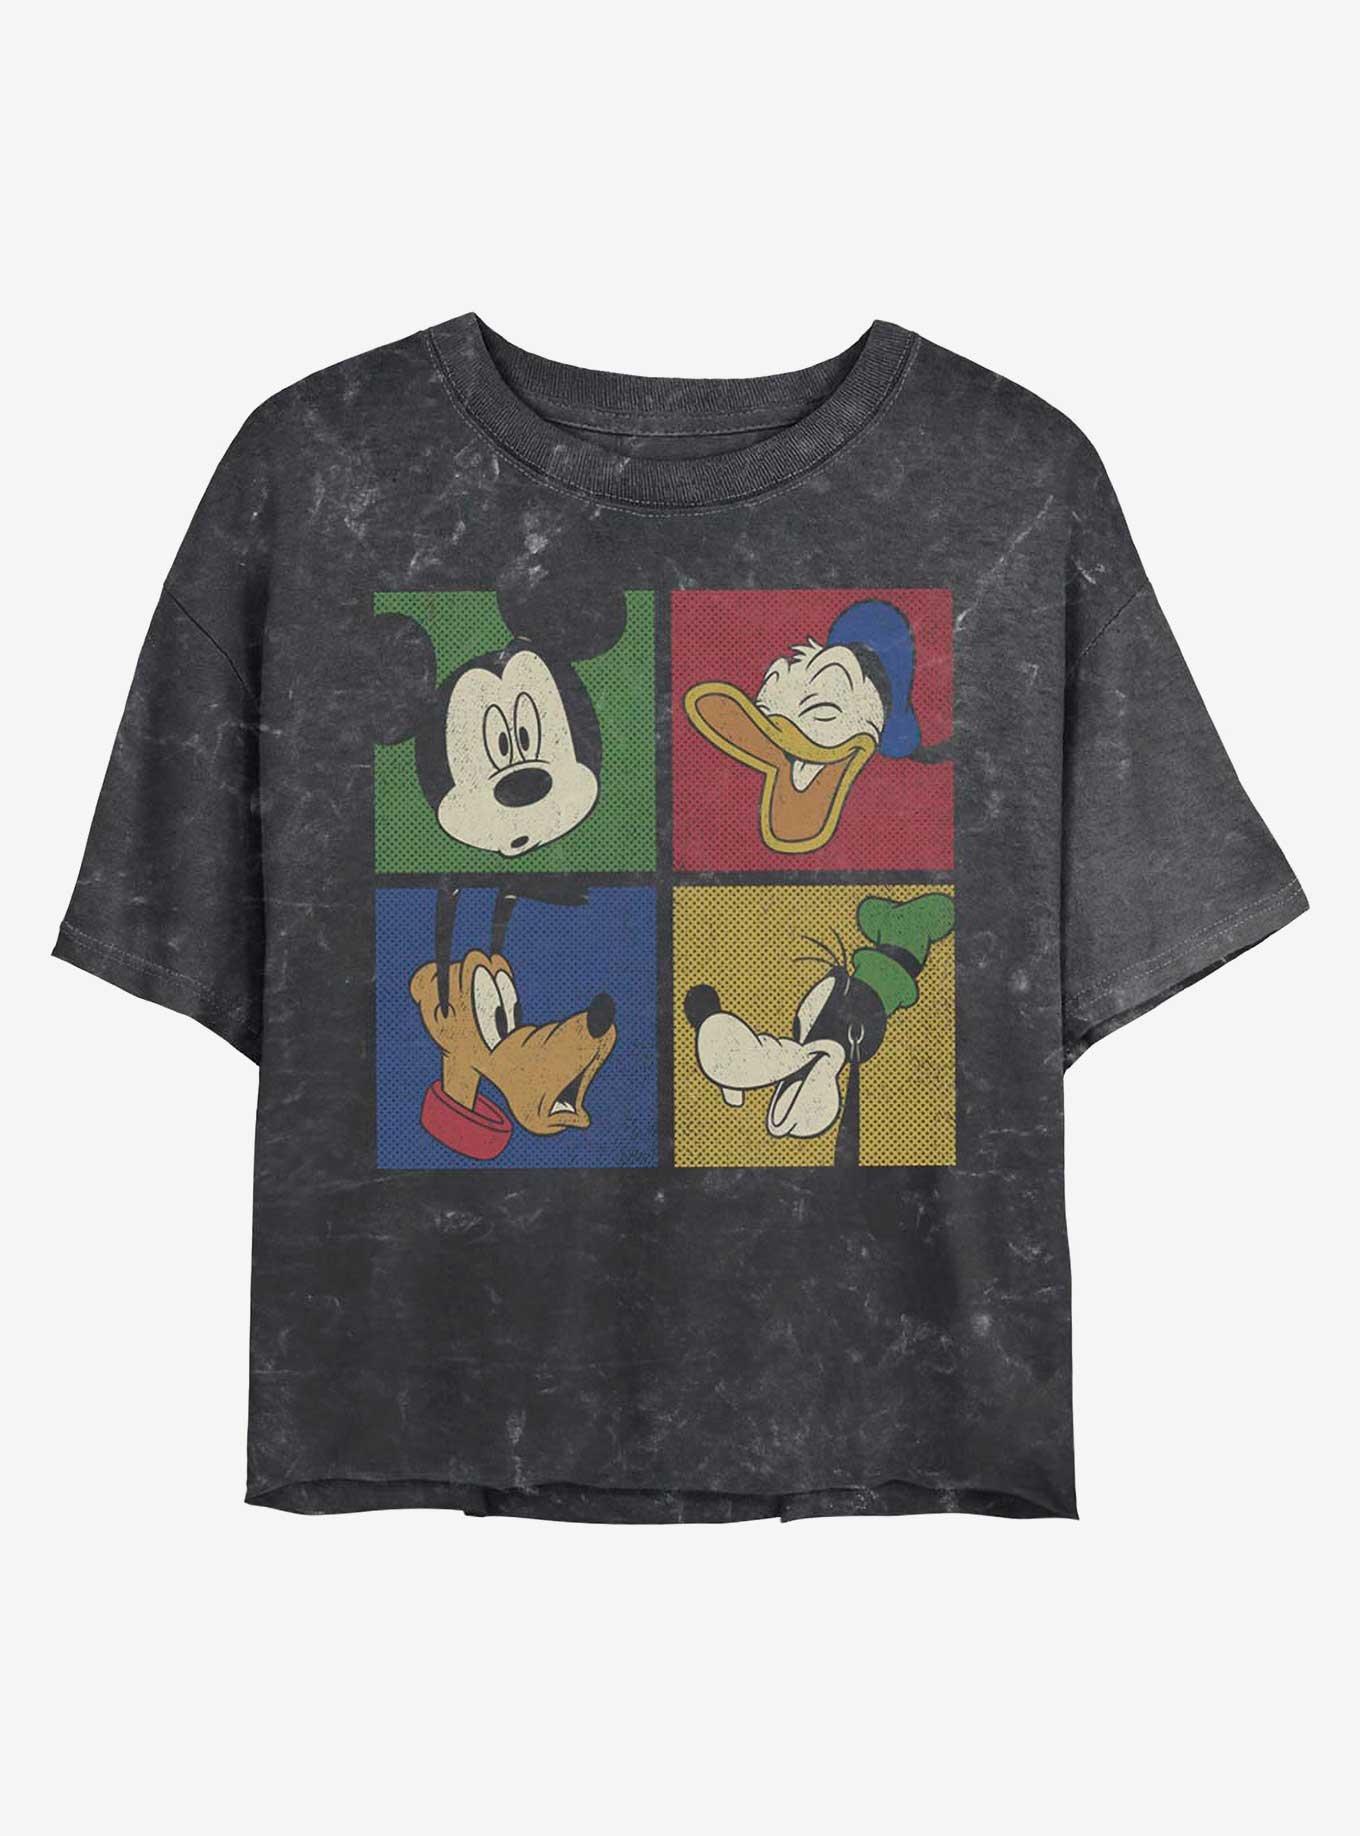 Disney Mickey Mouse Block Party Mineral Wash Crop Girls T-Shirt, BLACK, hi-res